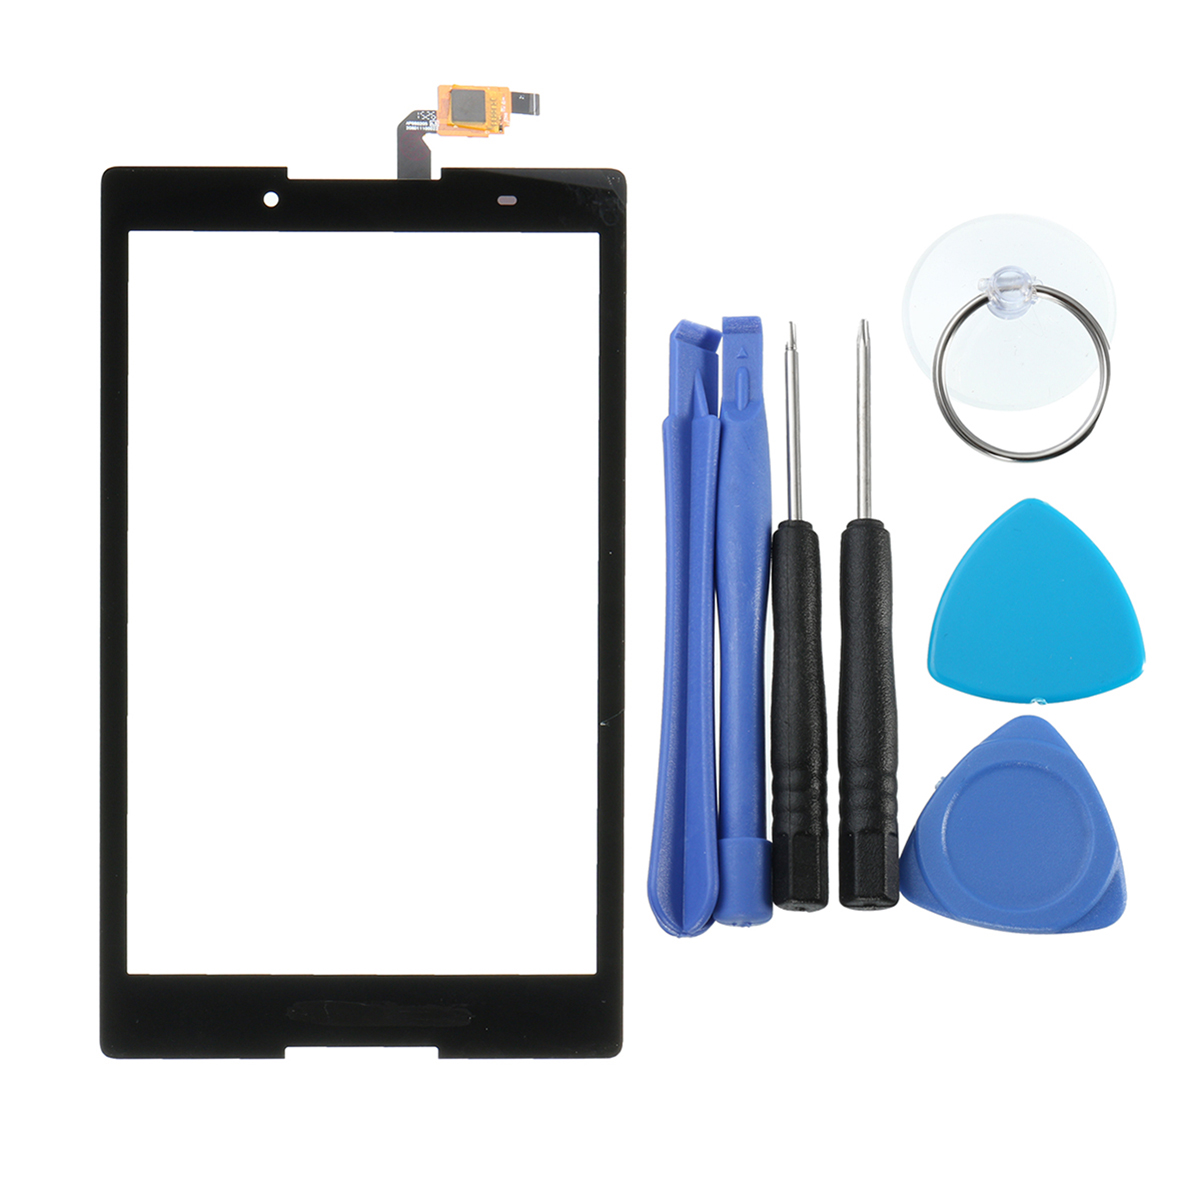 

Replacement Touch Digitizer External Screen+Tools For Lenovo Tab 2 A8-50f